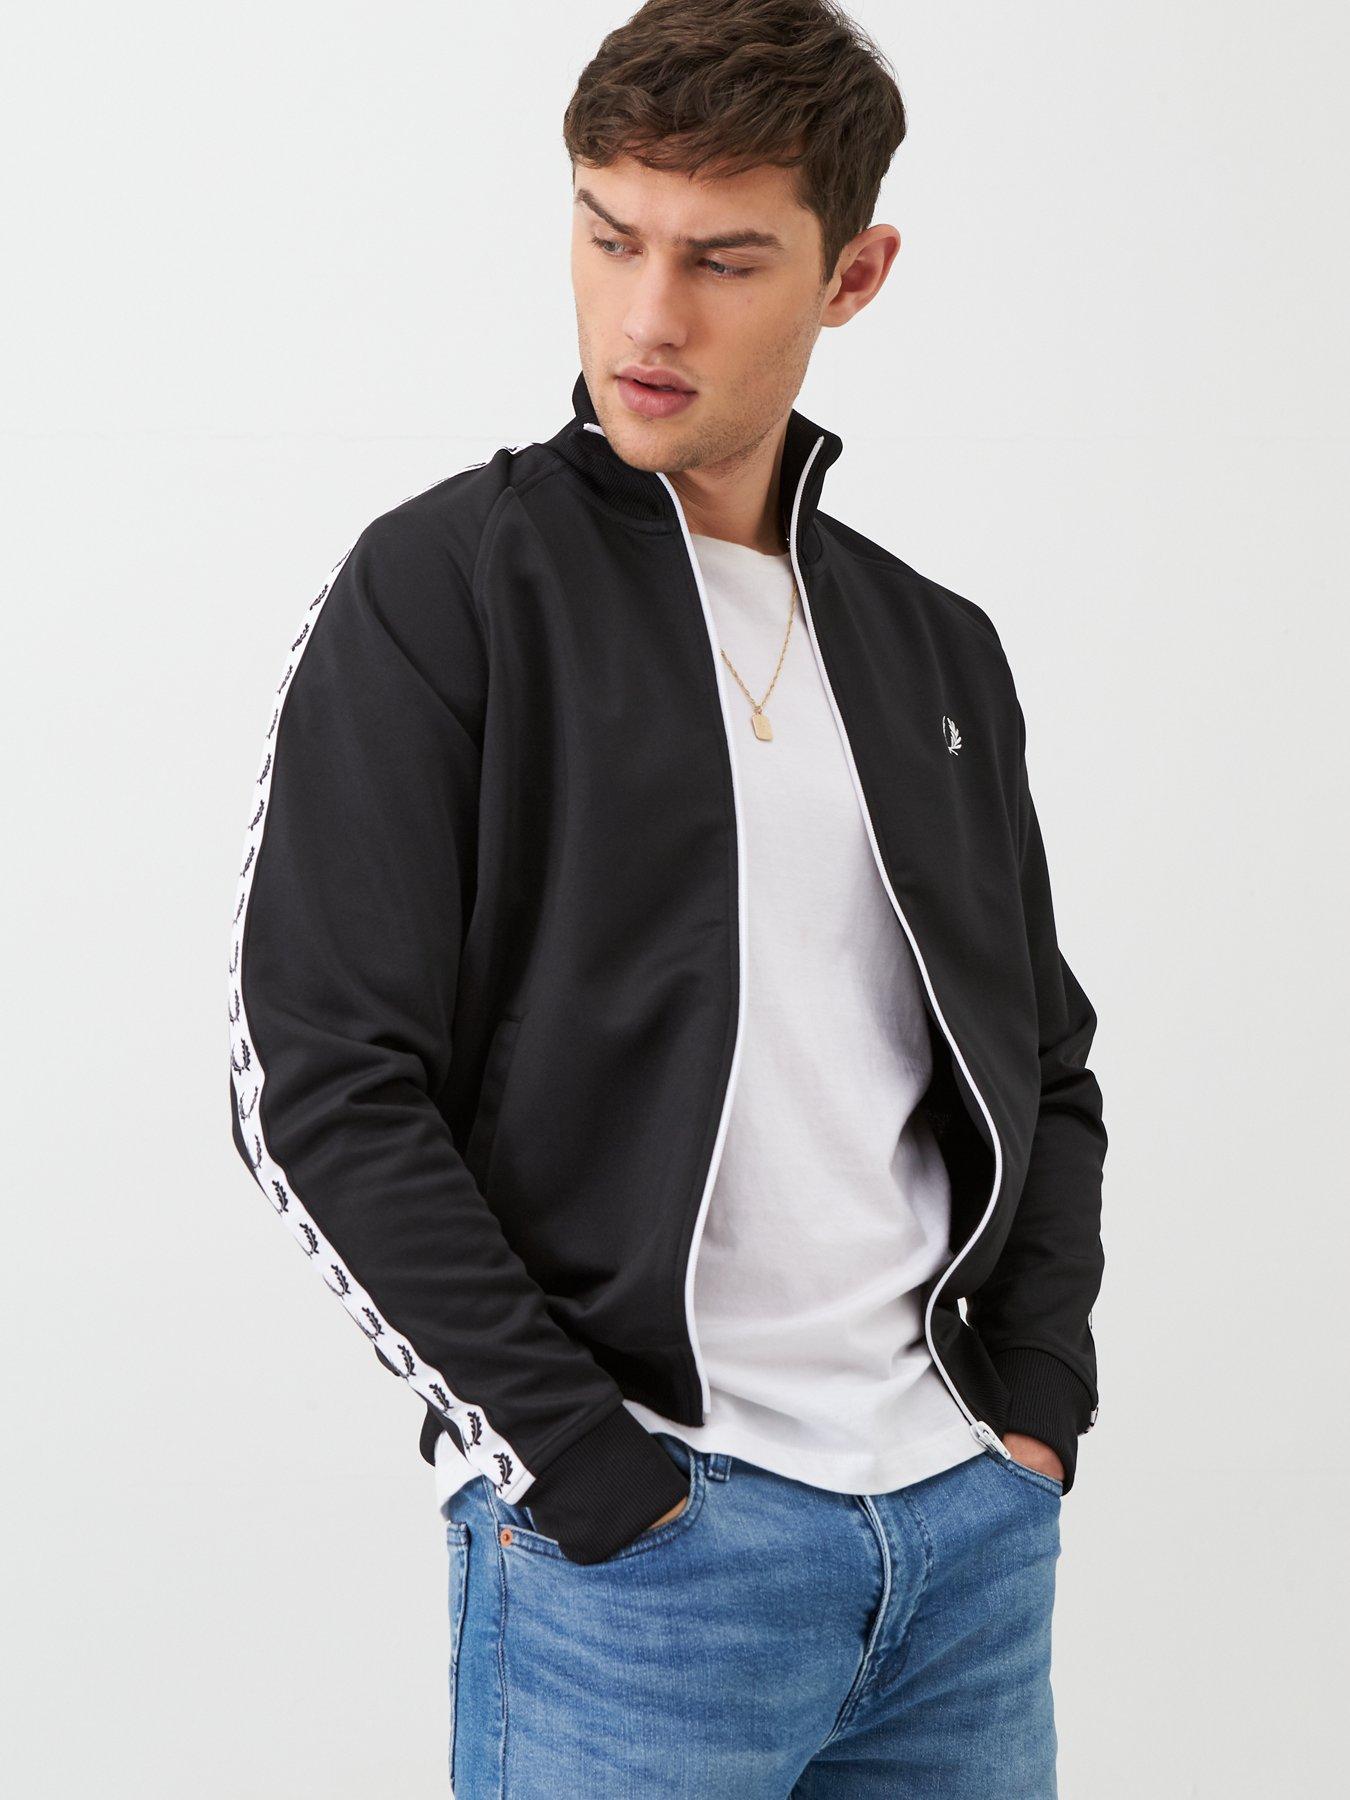 white fred perry track jacket